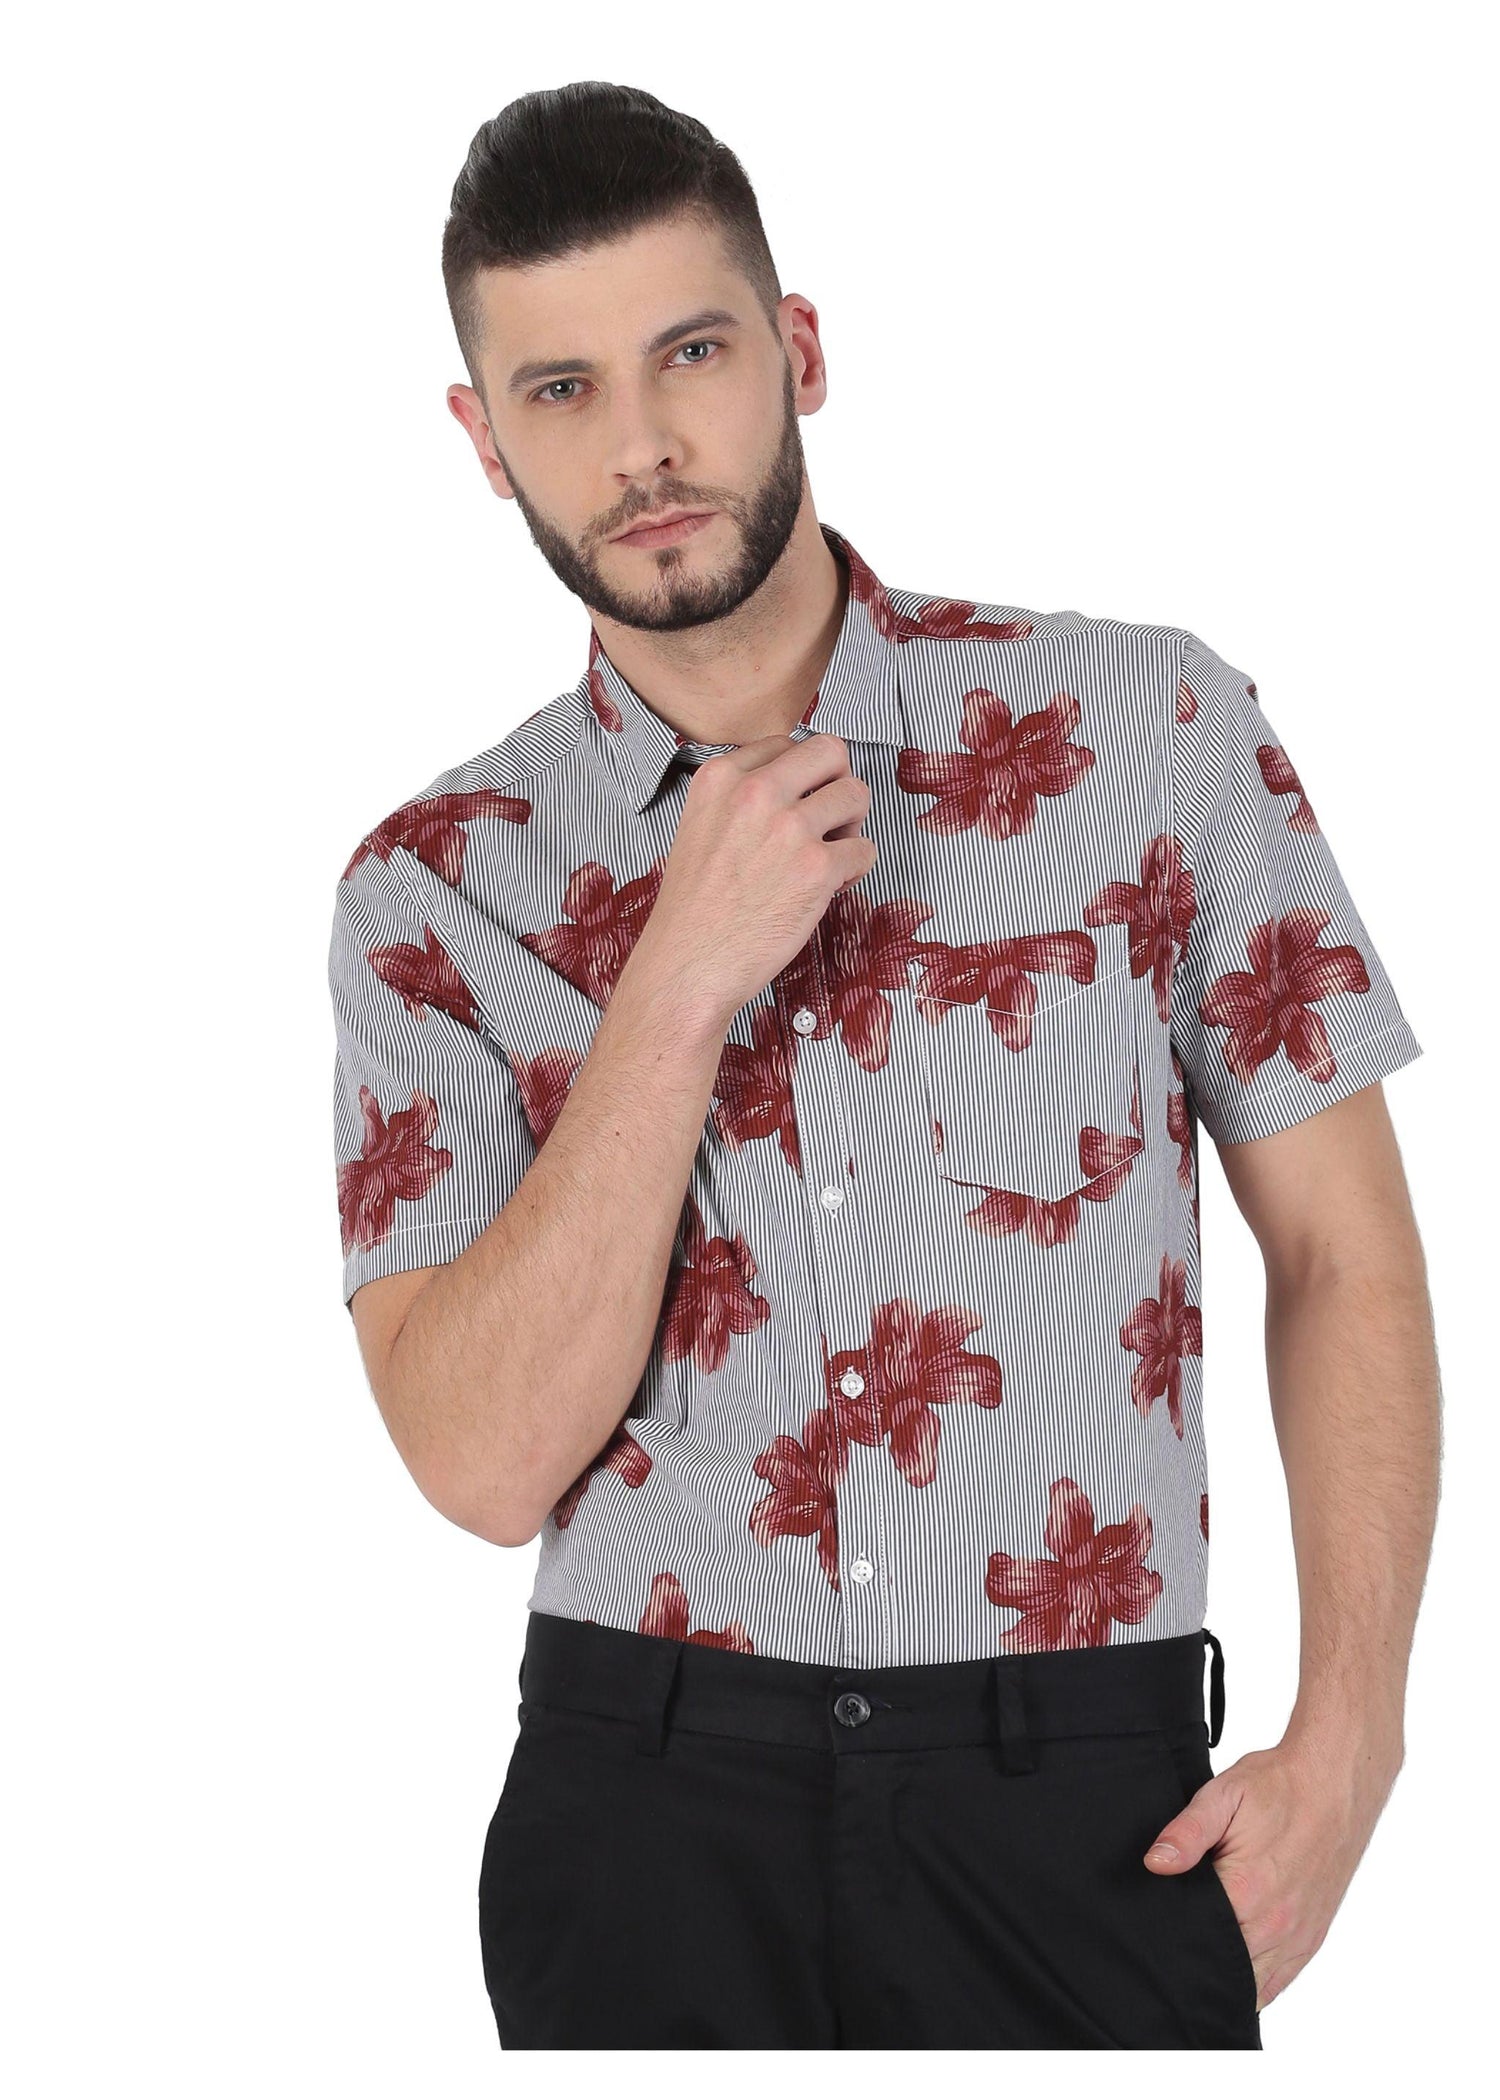 Tusok-brown-bloomFeatured Shirt, Vacation-Printed Shirtimage-Brown Bloom (7)